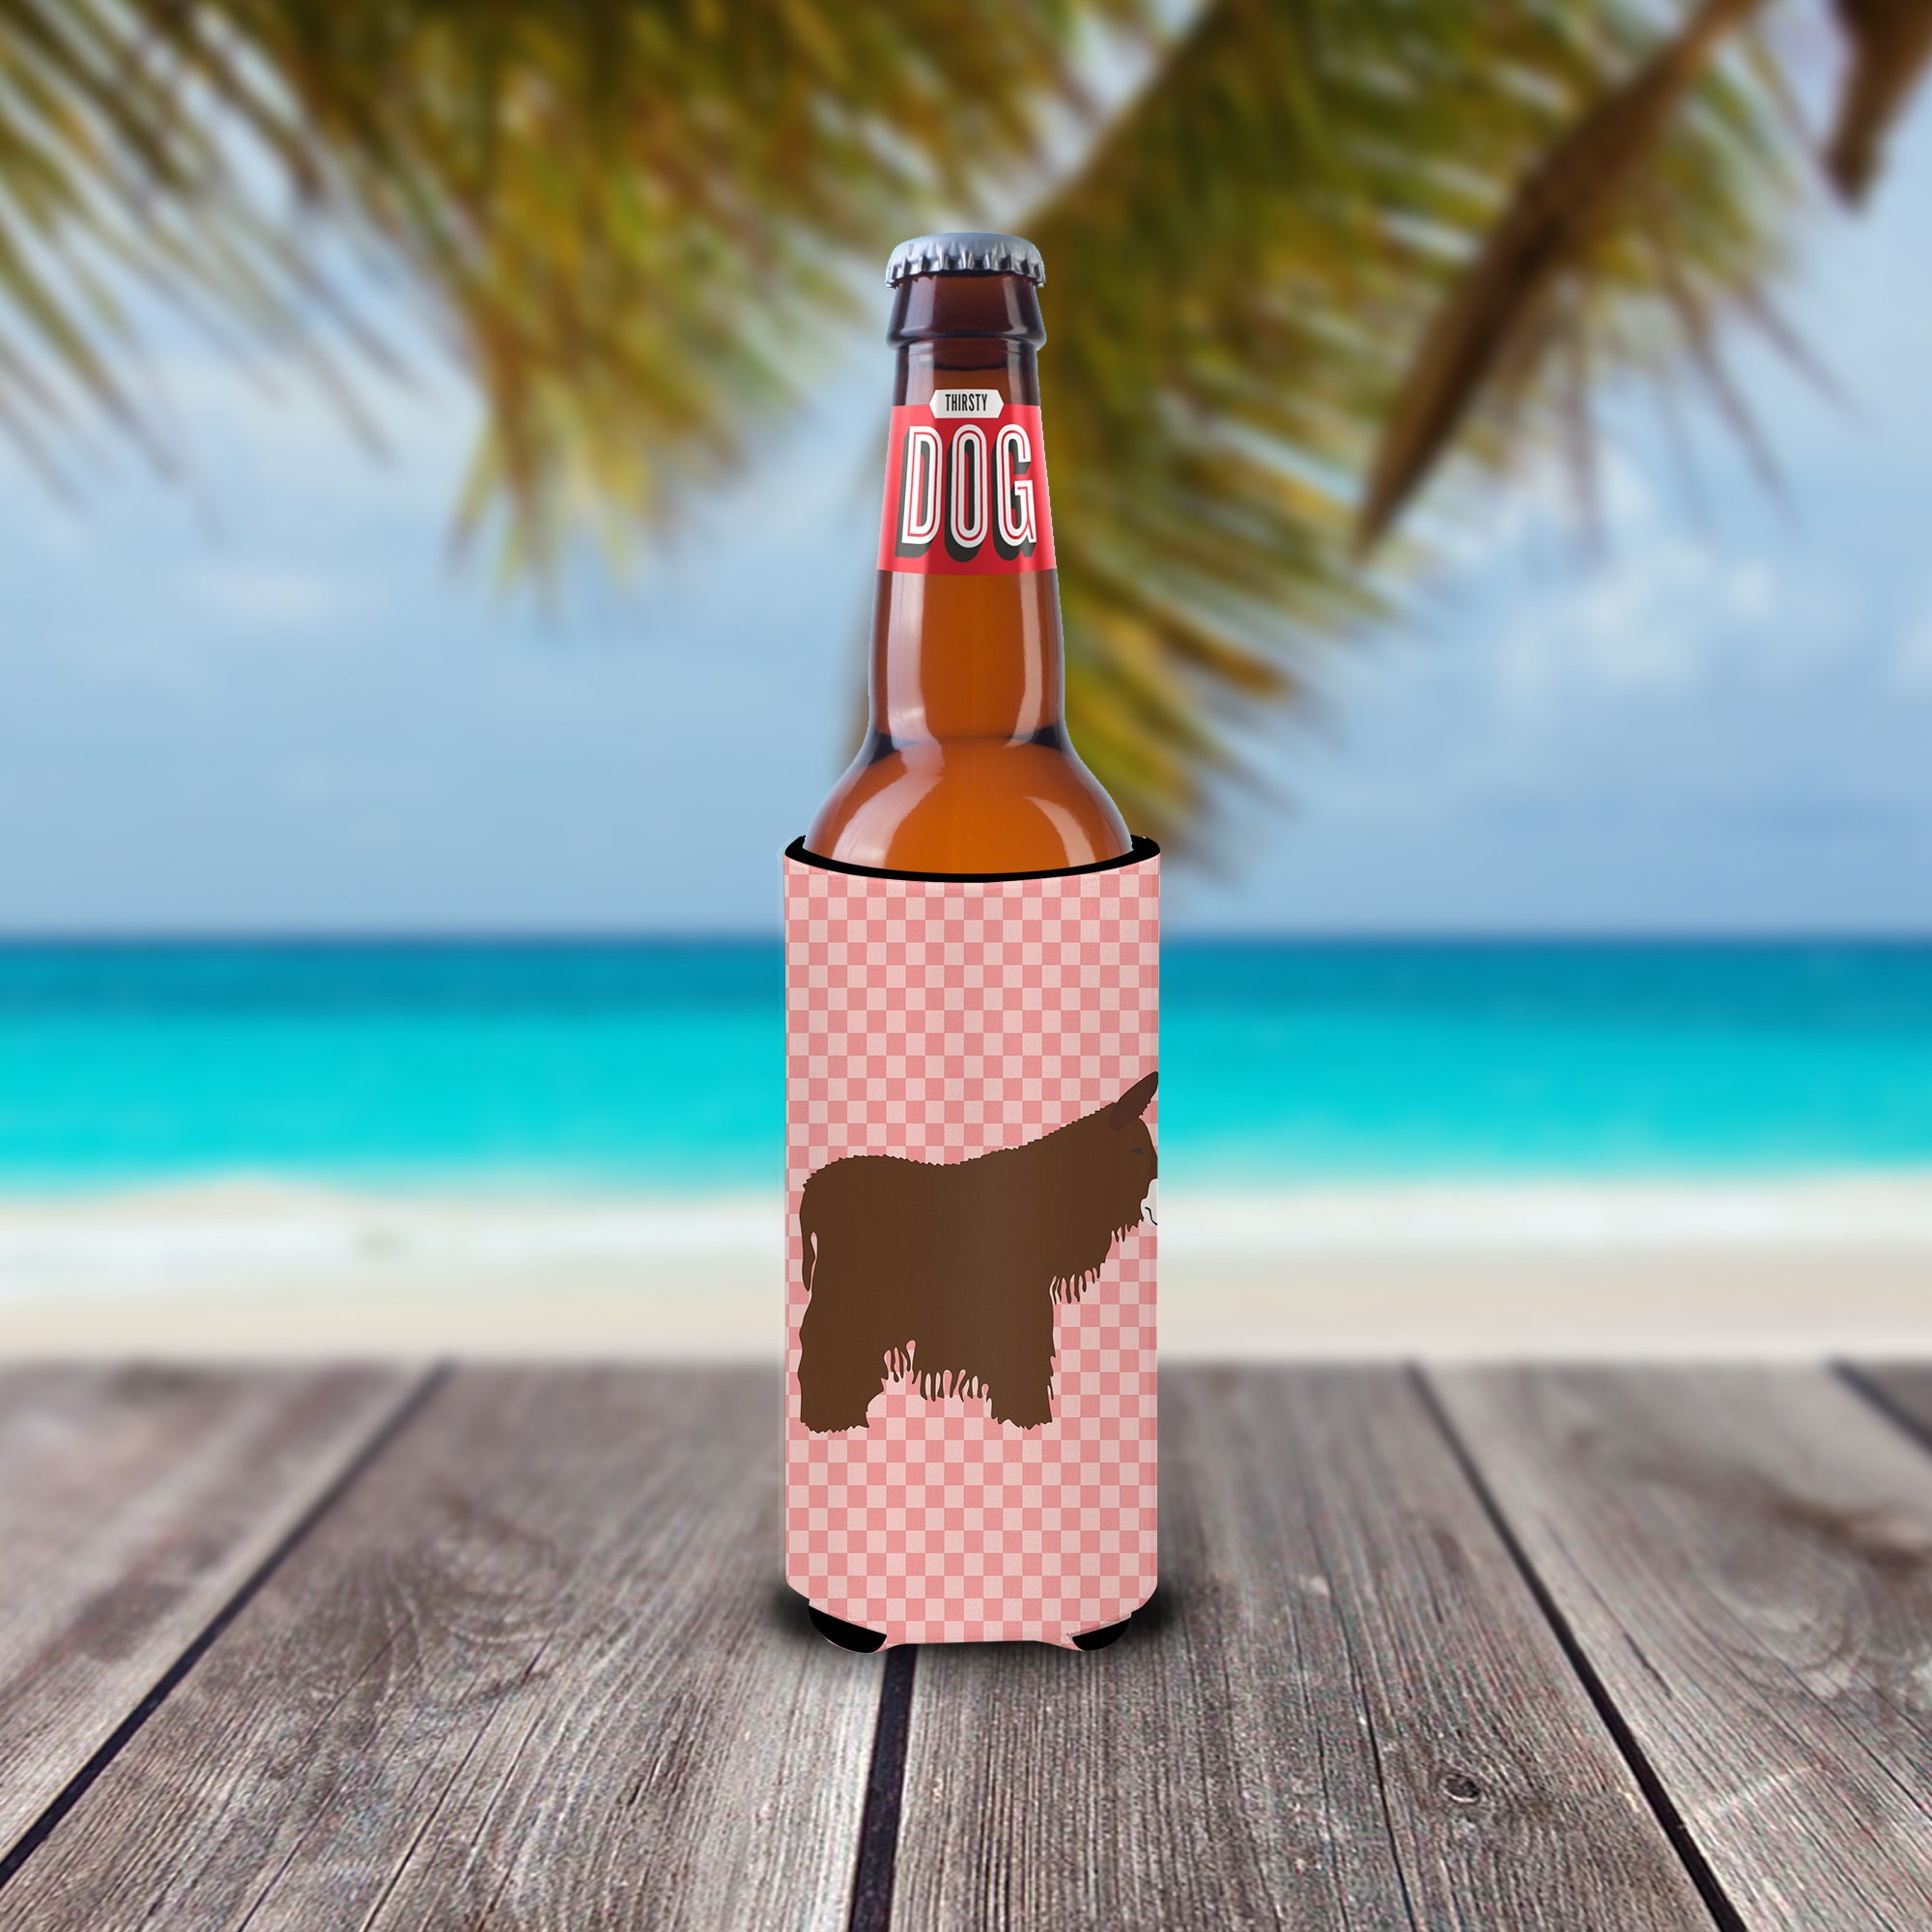 Poitou Poiteuin Donkey Pink Check  Ultra Hugger for slim cans  the-store.com.